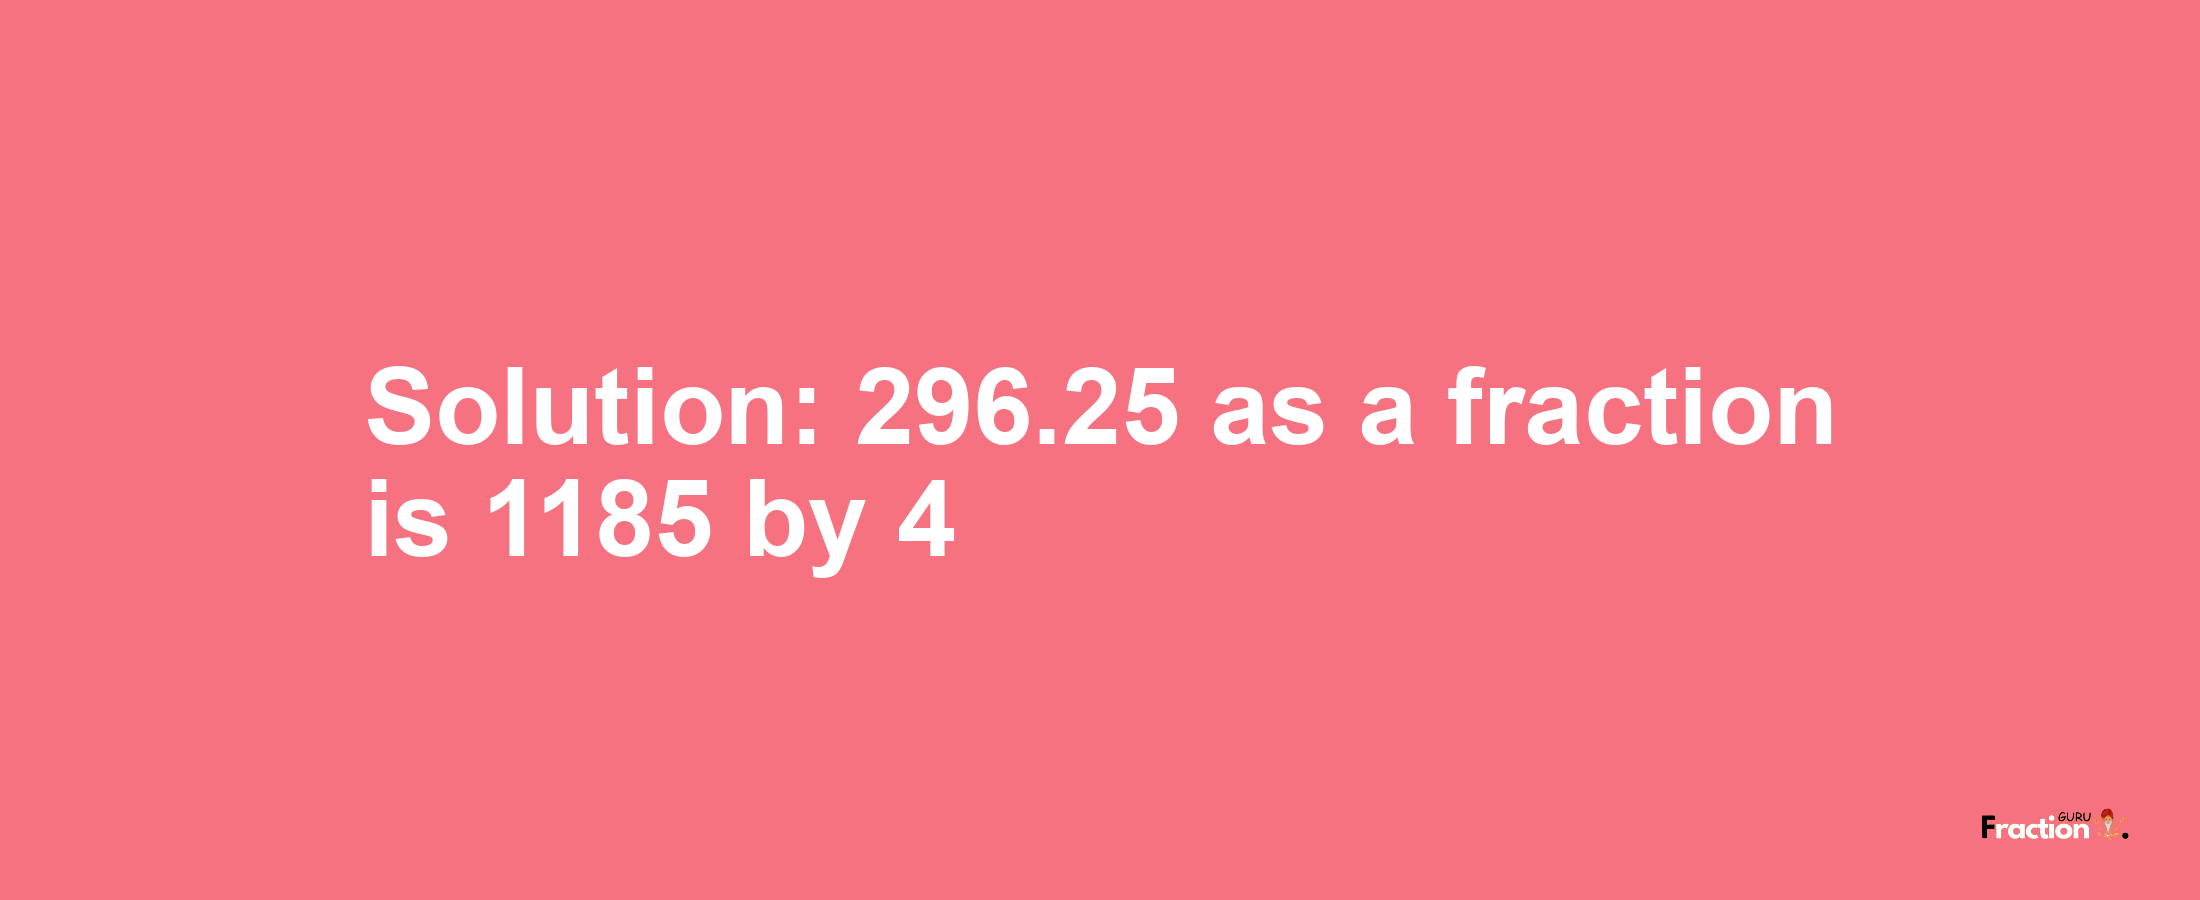 Solution:296.25 as a fraction is 1185/4